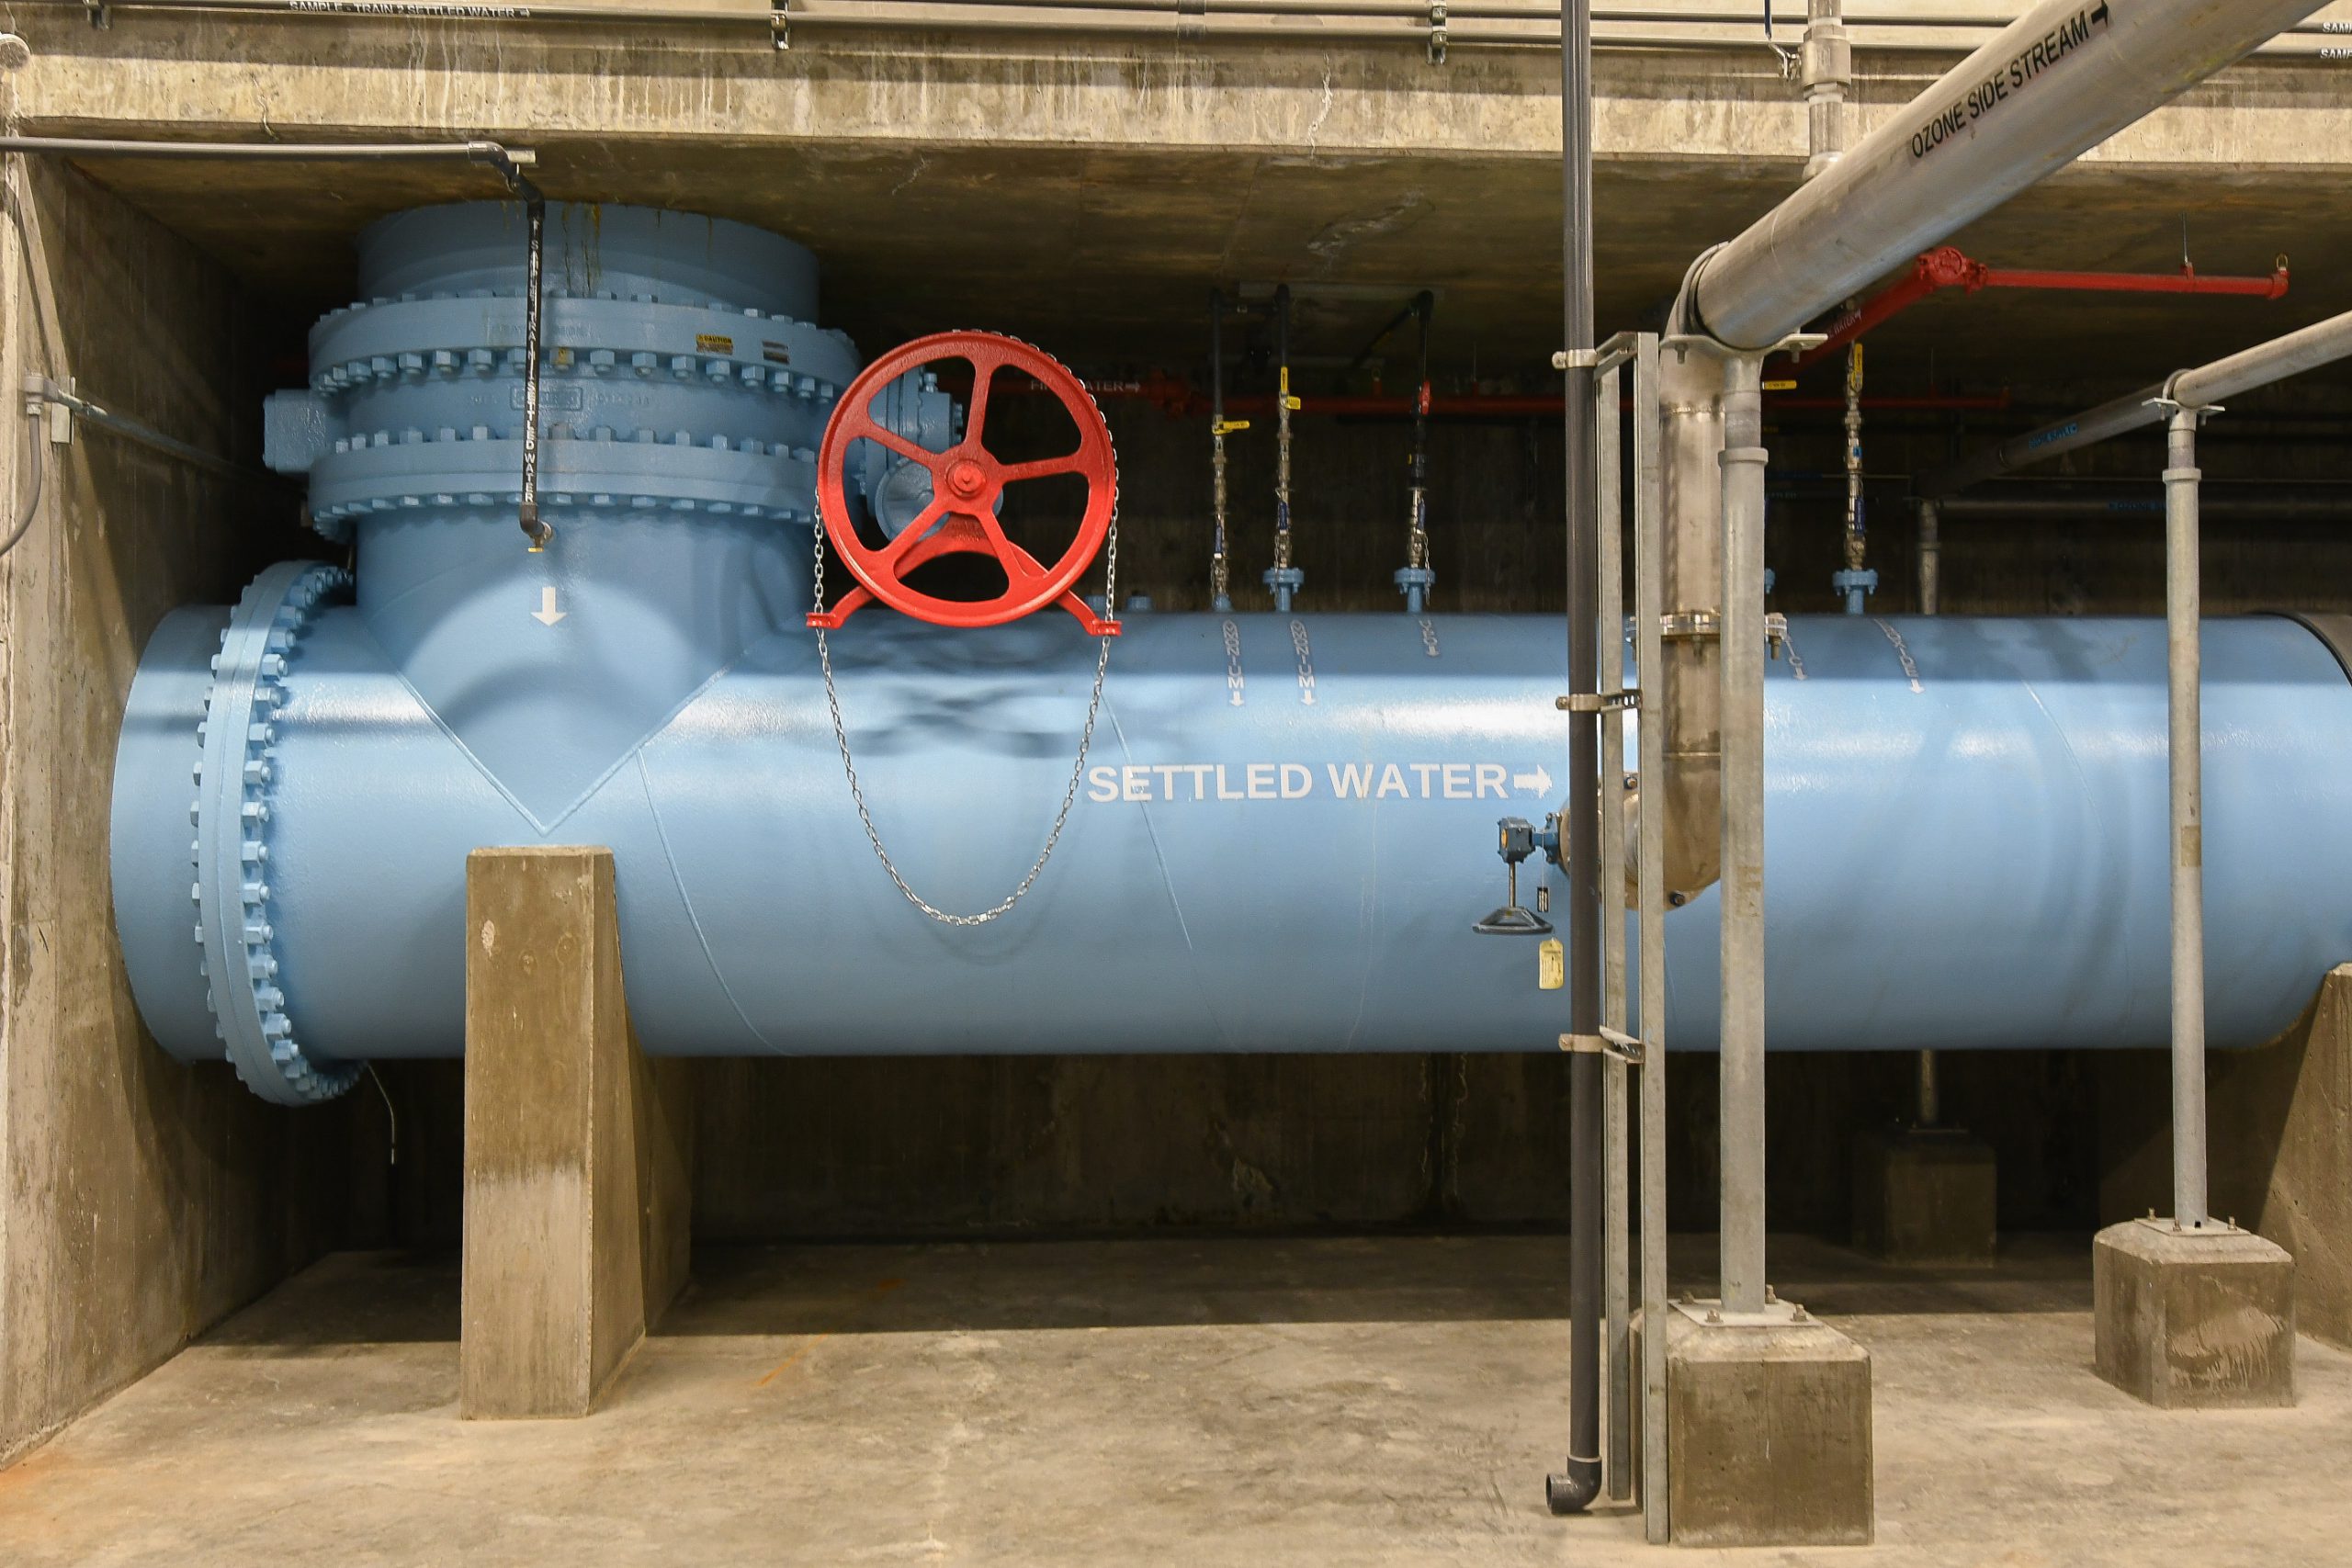 A large blue pipe labeled settled water runs horizontally with a red wheel placed in front to adjust the water flow.